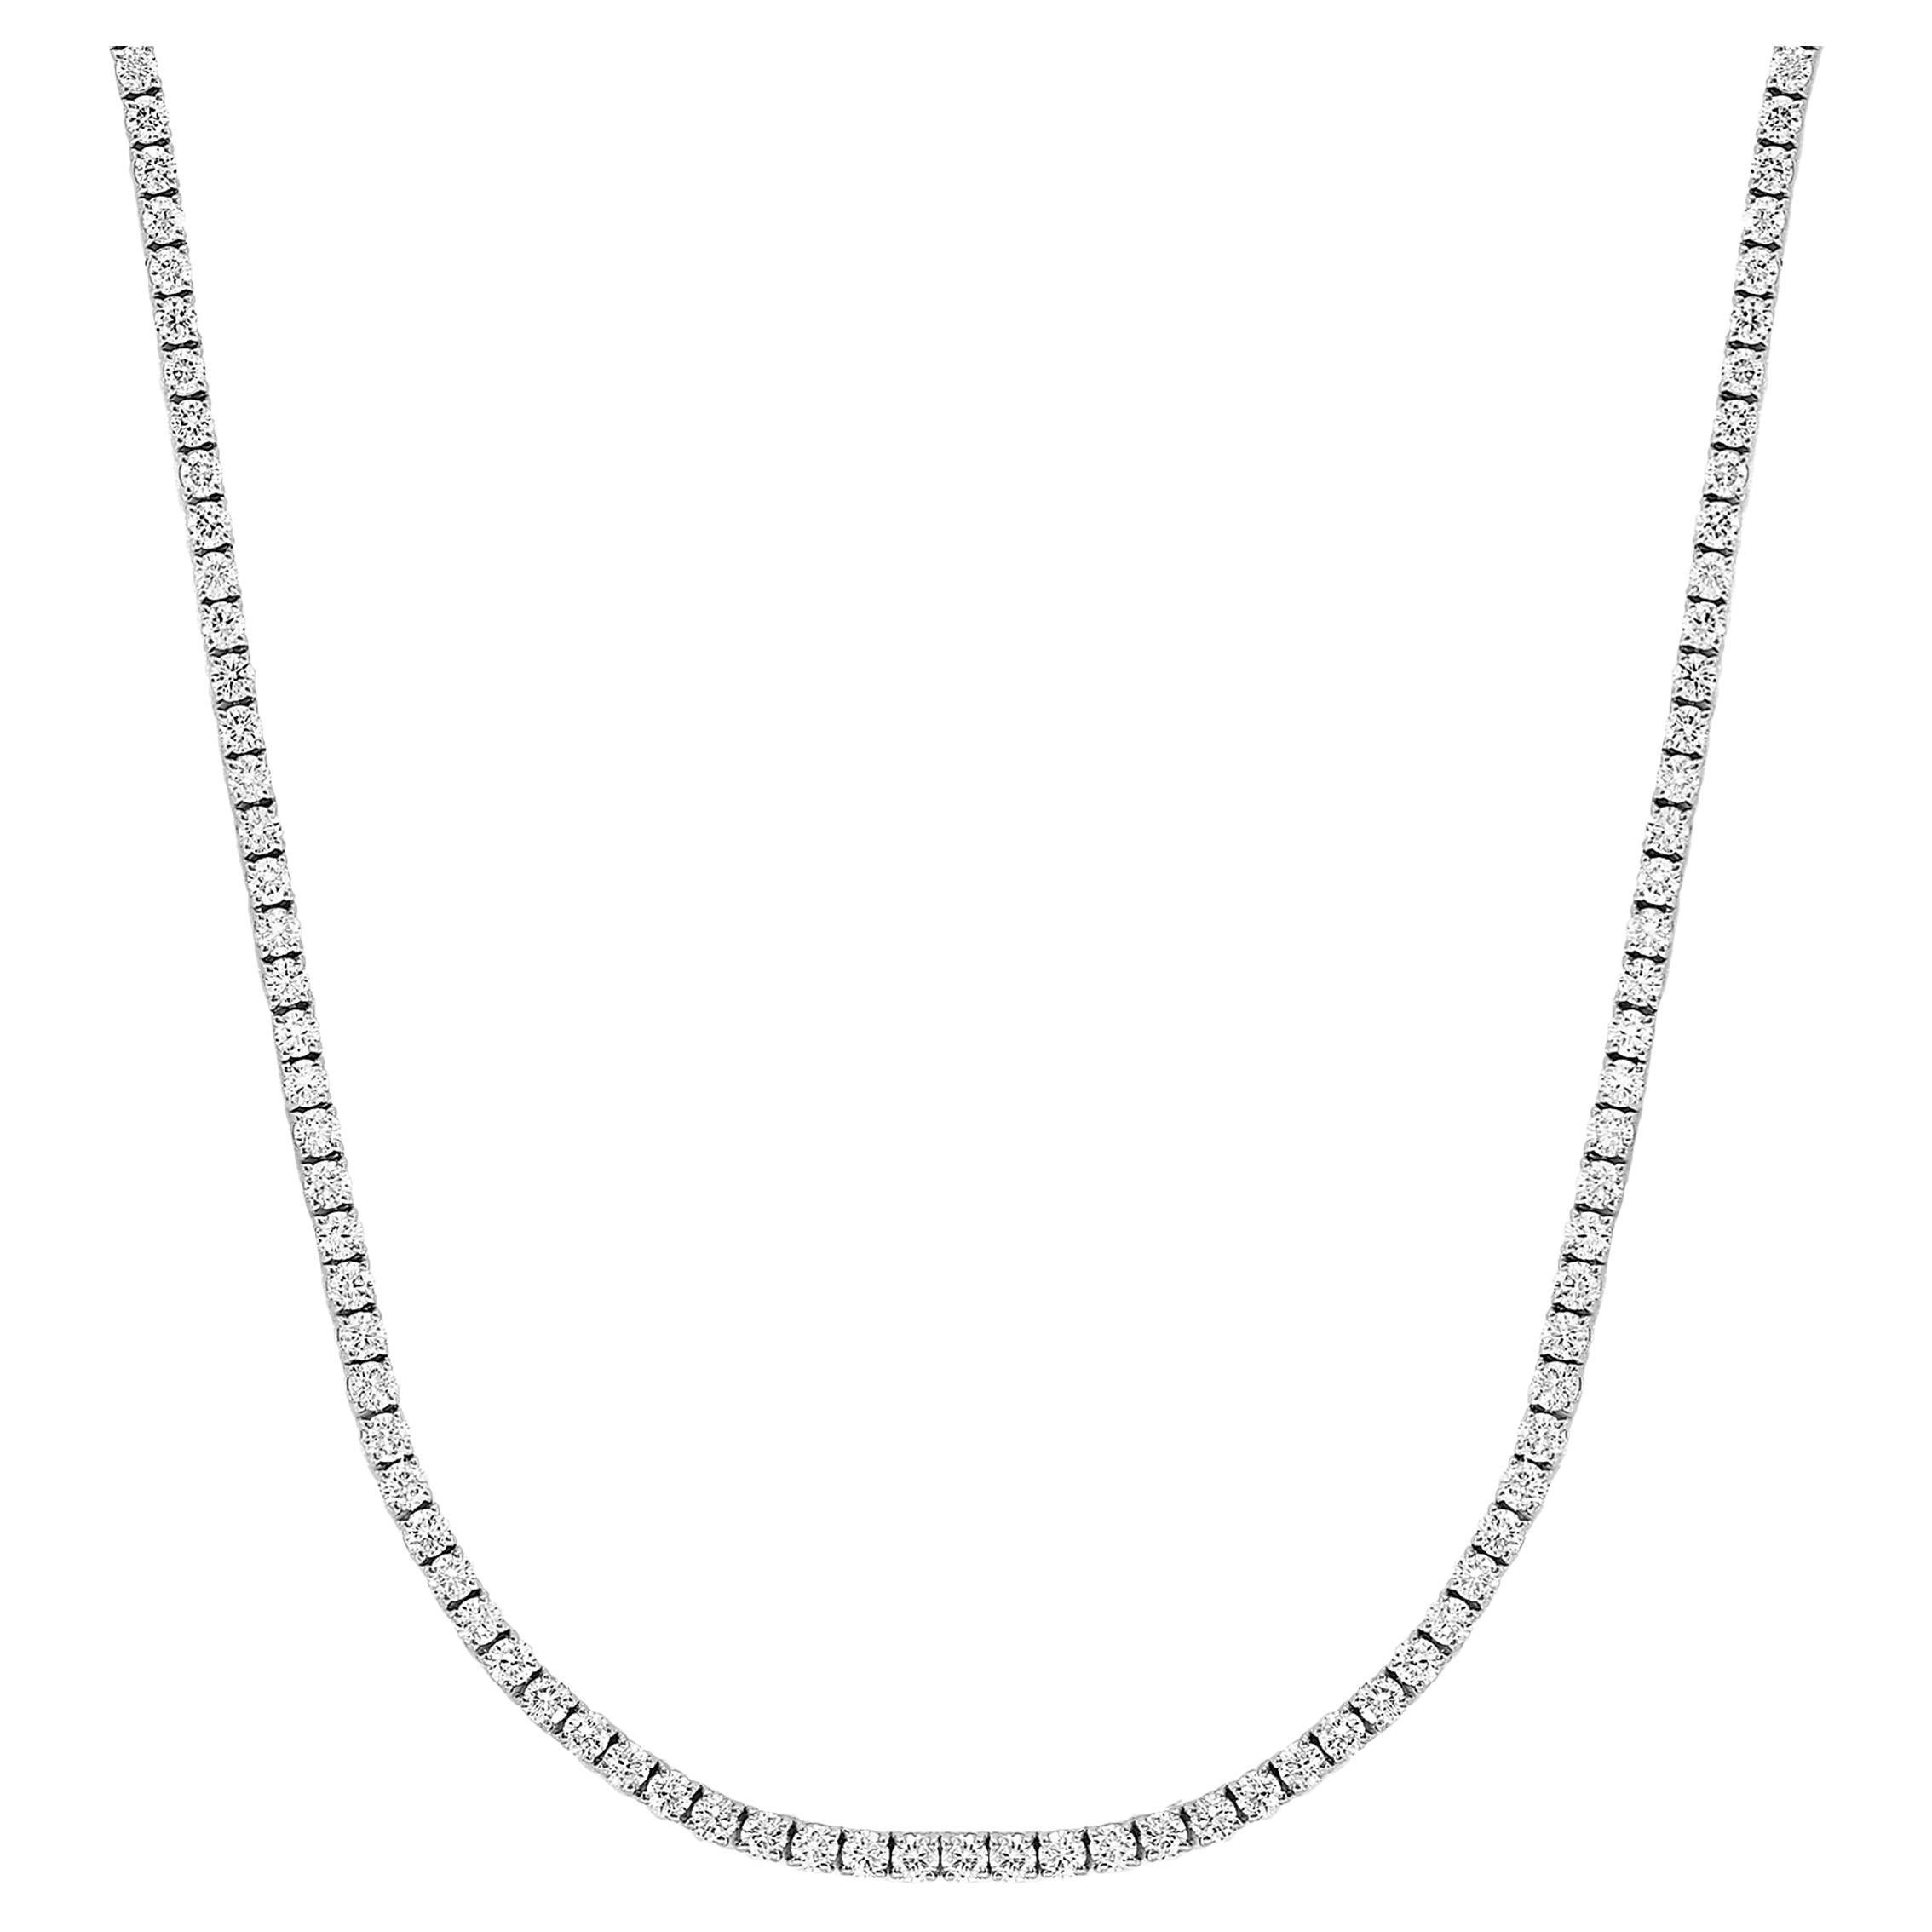 11.31 Carat Diamond Tennis Necklace in 14K White Gold For Sale